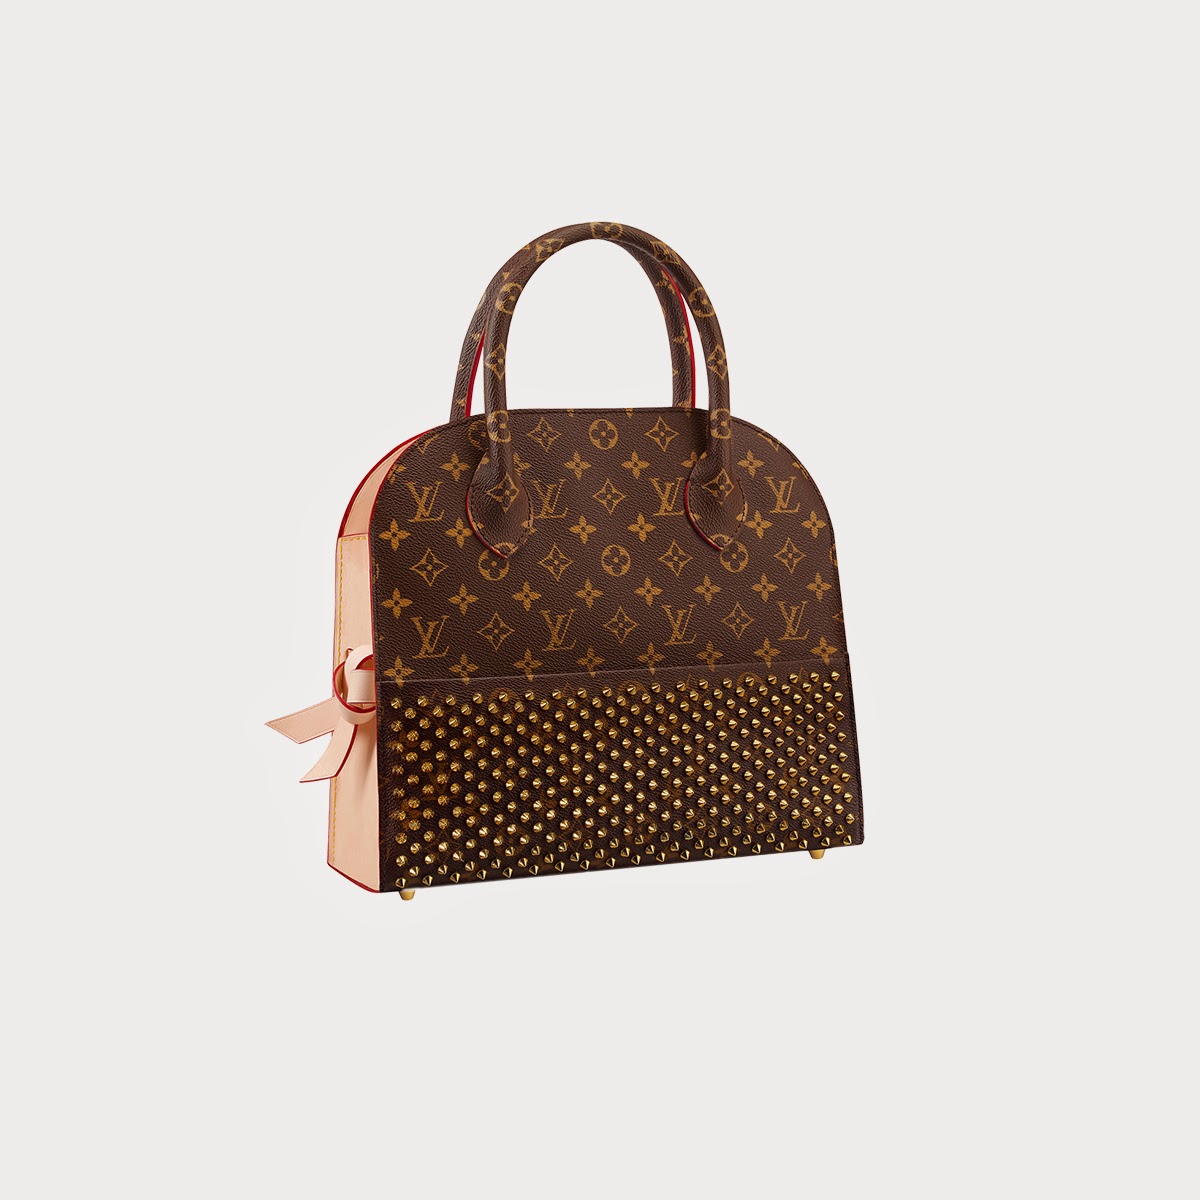 Louis Vuitton Celebrating Monogram: The Icon and Iconoclasts by Christian Louboutin |In LVoe ...